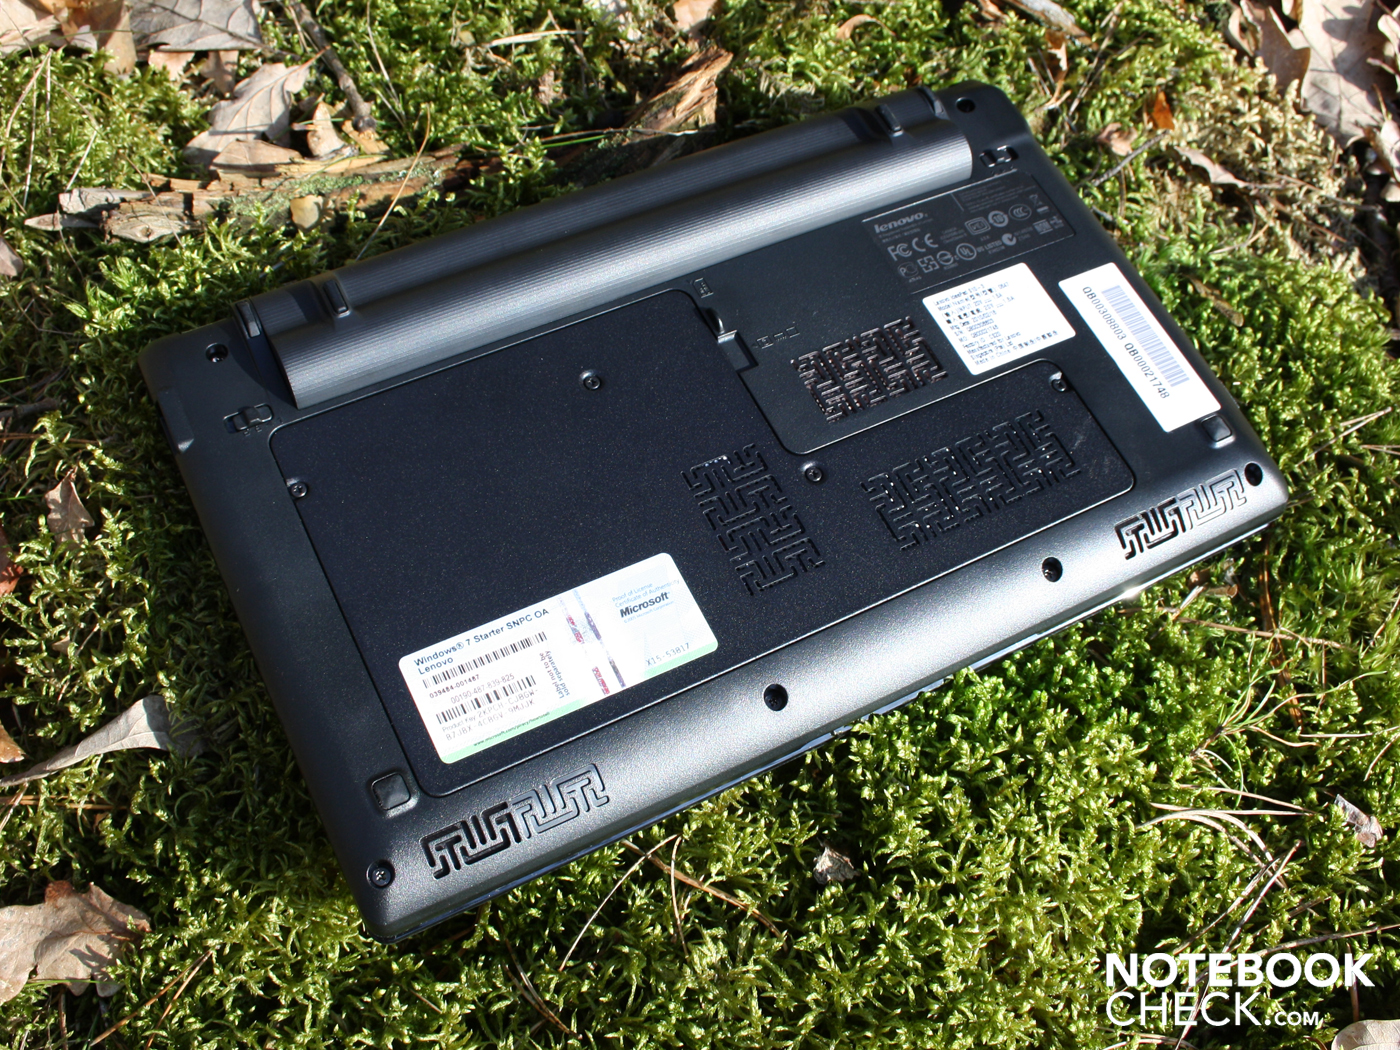 bh Citere mudder Review Lenovo IdeaPad S10-3 Netbook - NotebookCheck.net Reviews